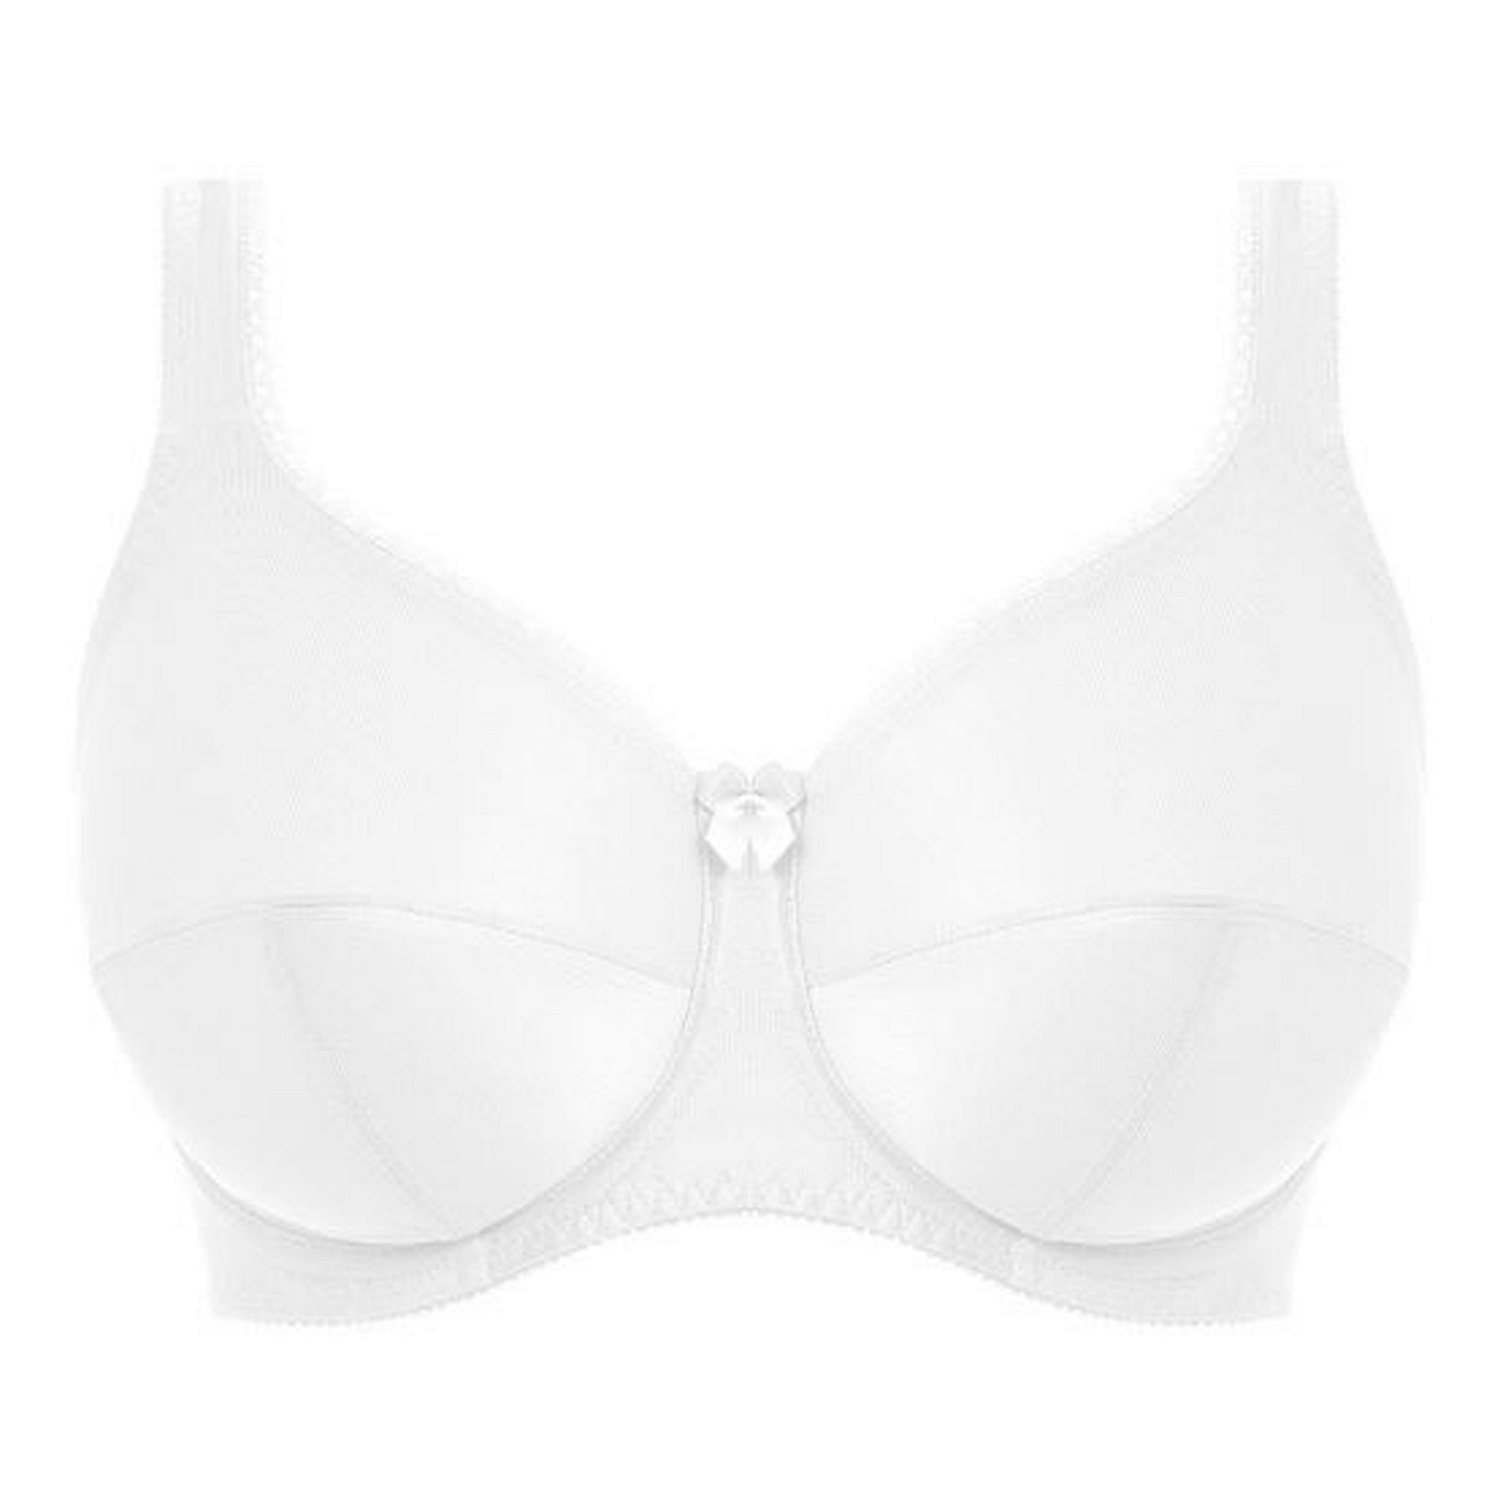 FANTASIE Speciality Smooth Full Cup Bra White